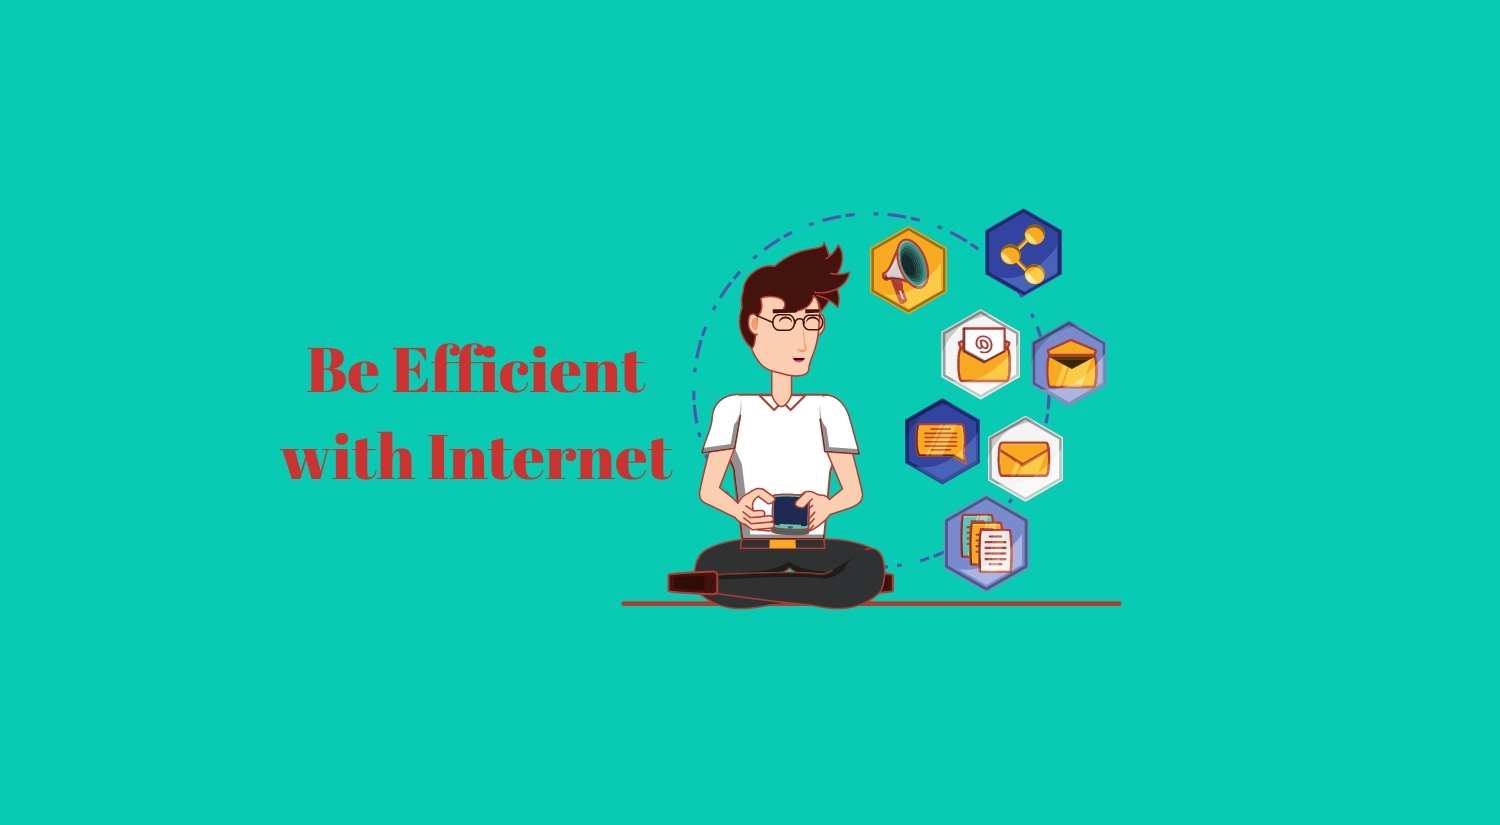 How to be efficient with internet